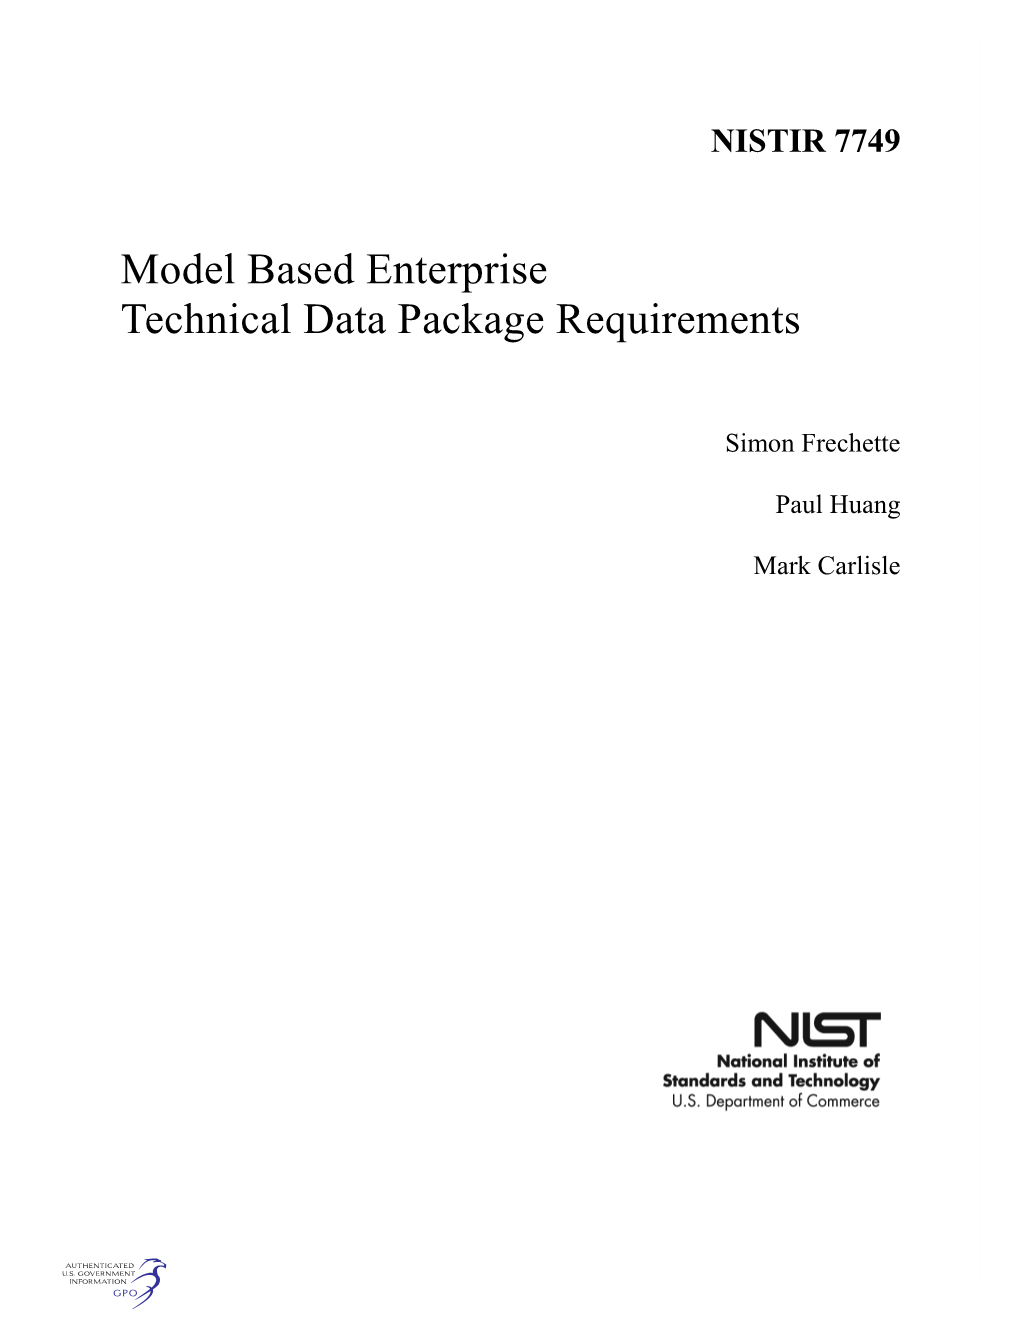 Model Based Enterprise Technical Data Package Requirements